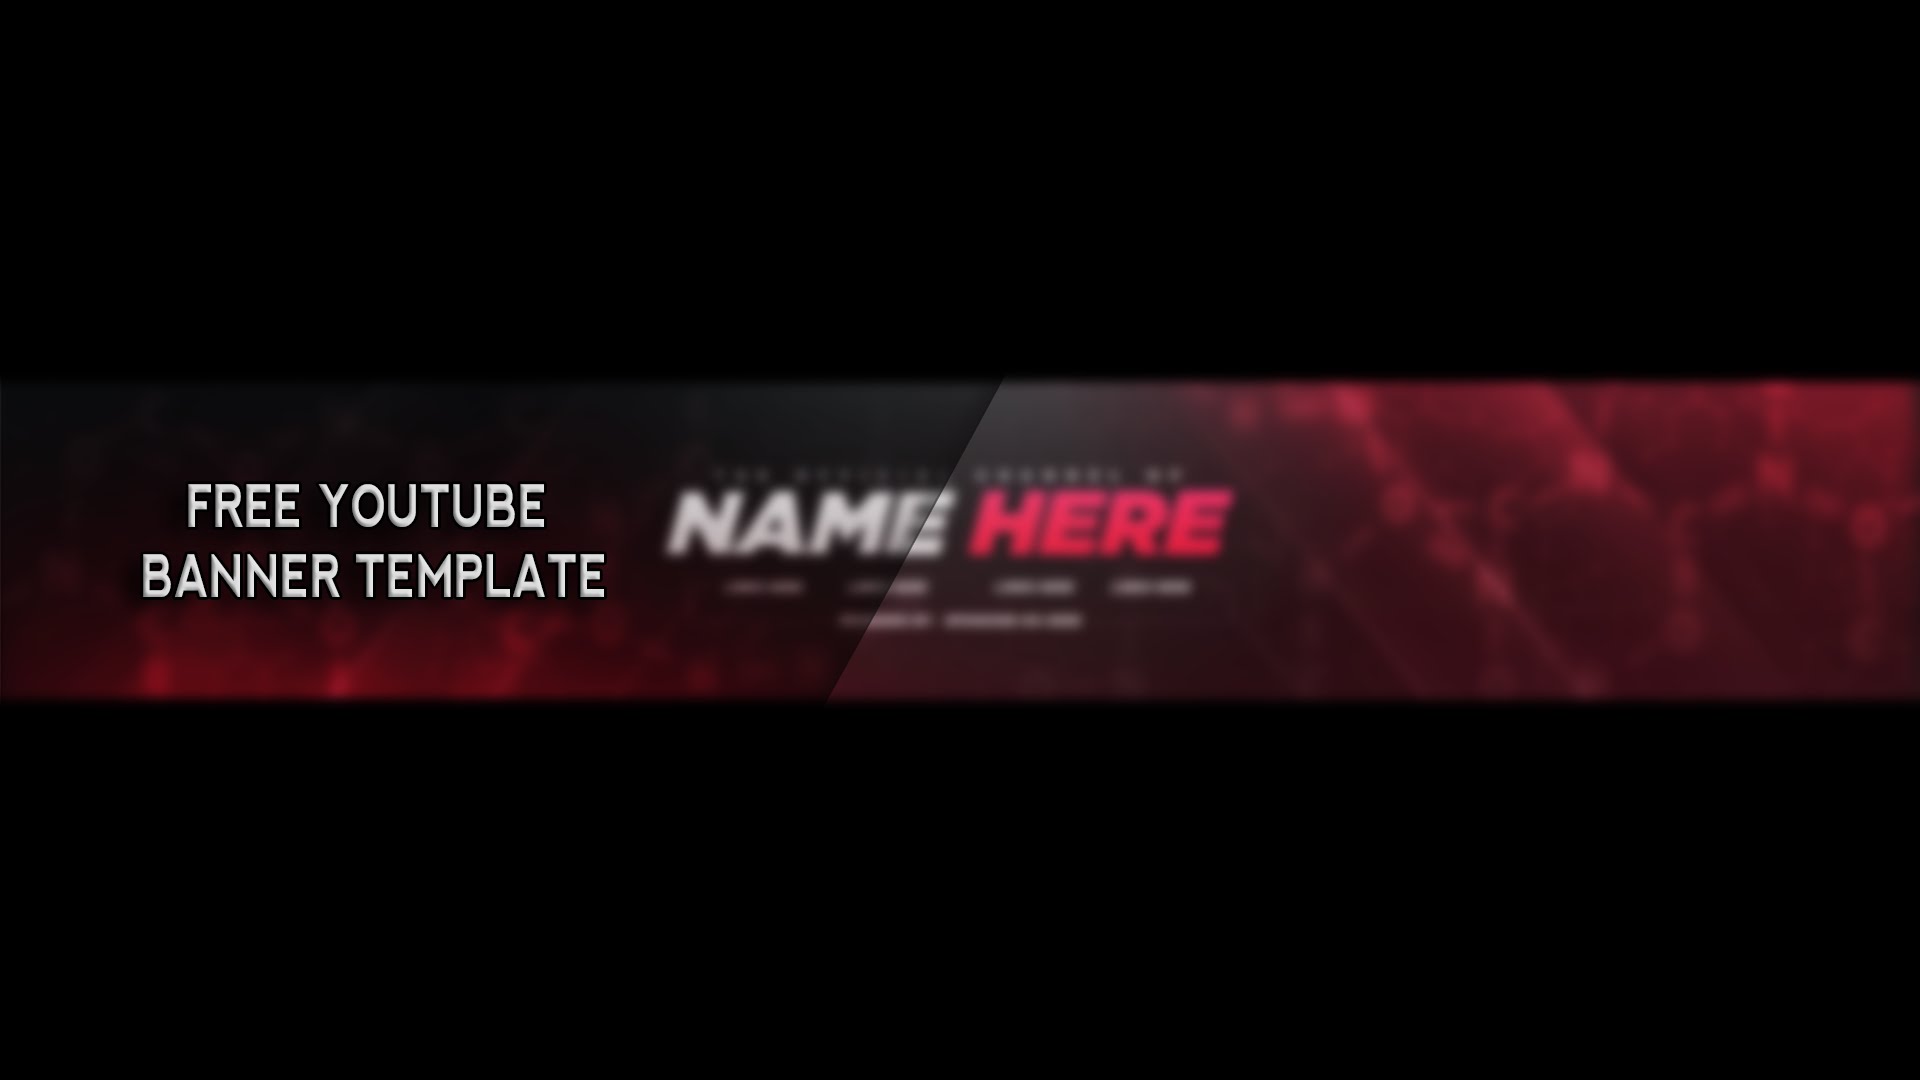 What is a Youtube Banner Template?